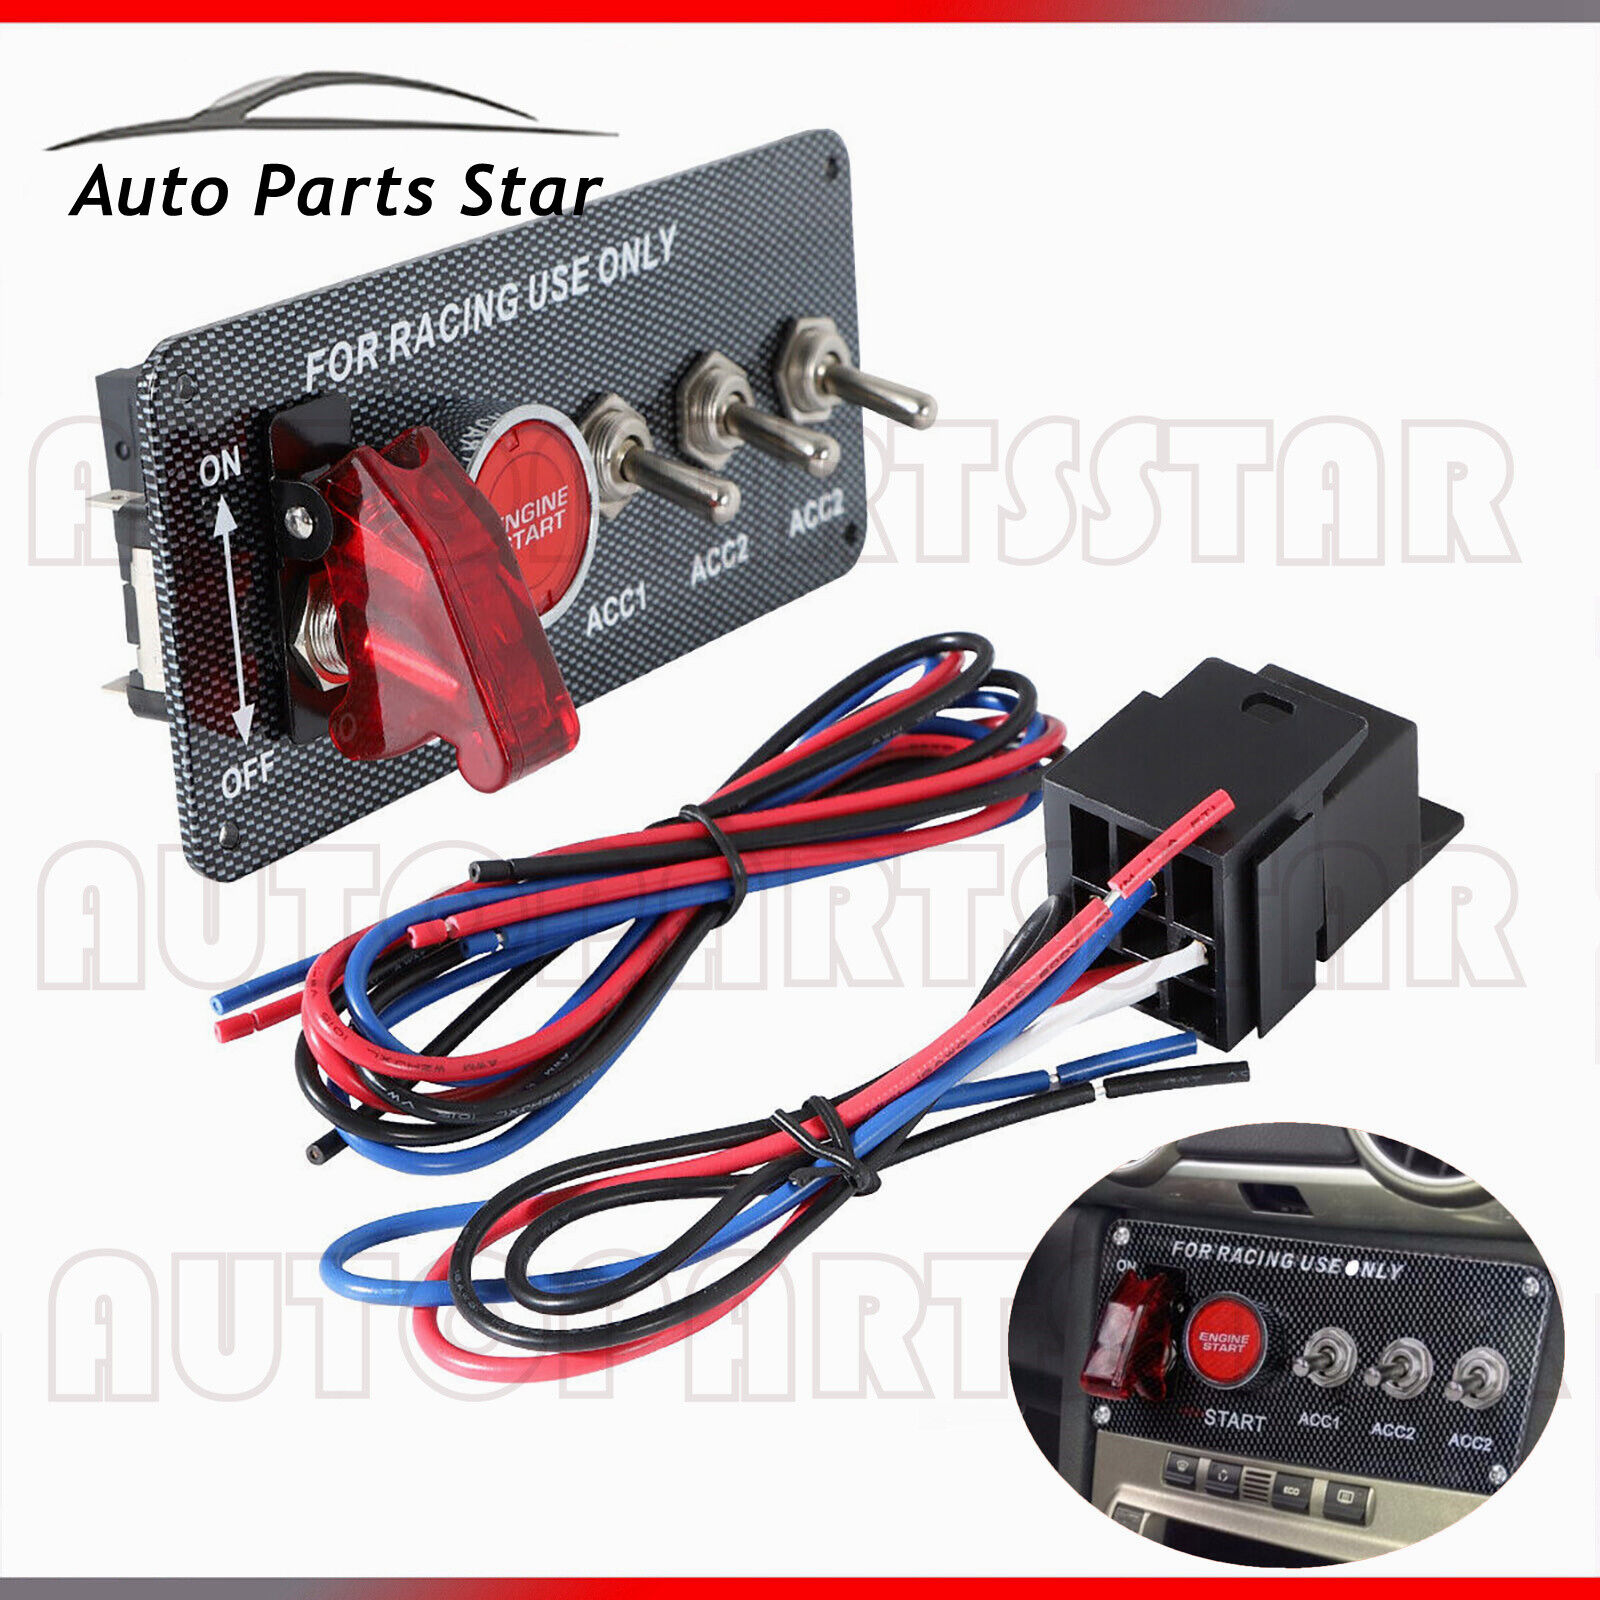 Carbon Ignition Switch Panel Engine Start Push Button LED 12V Toggle Racing Car